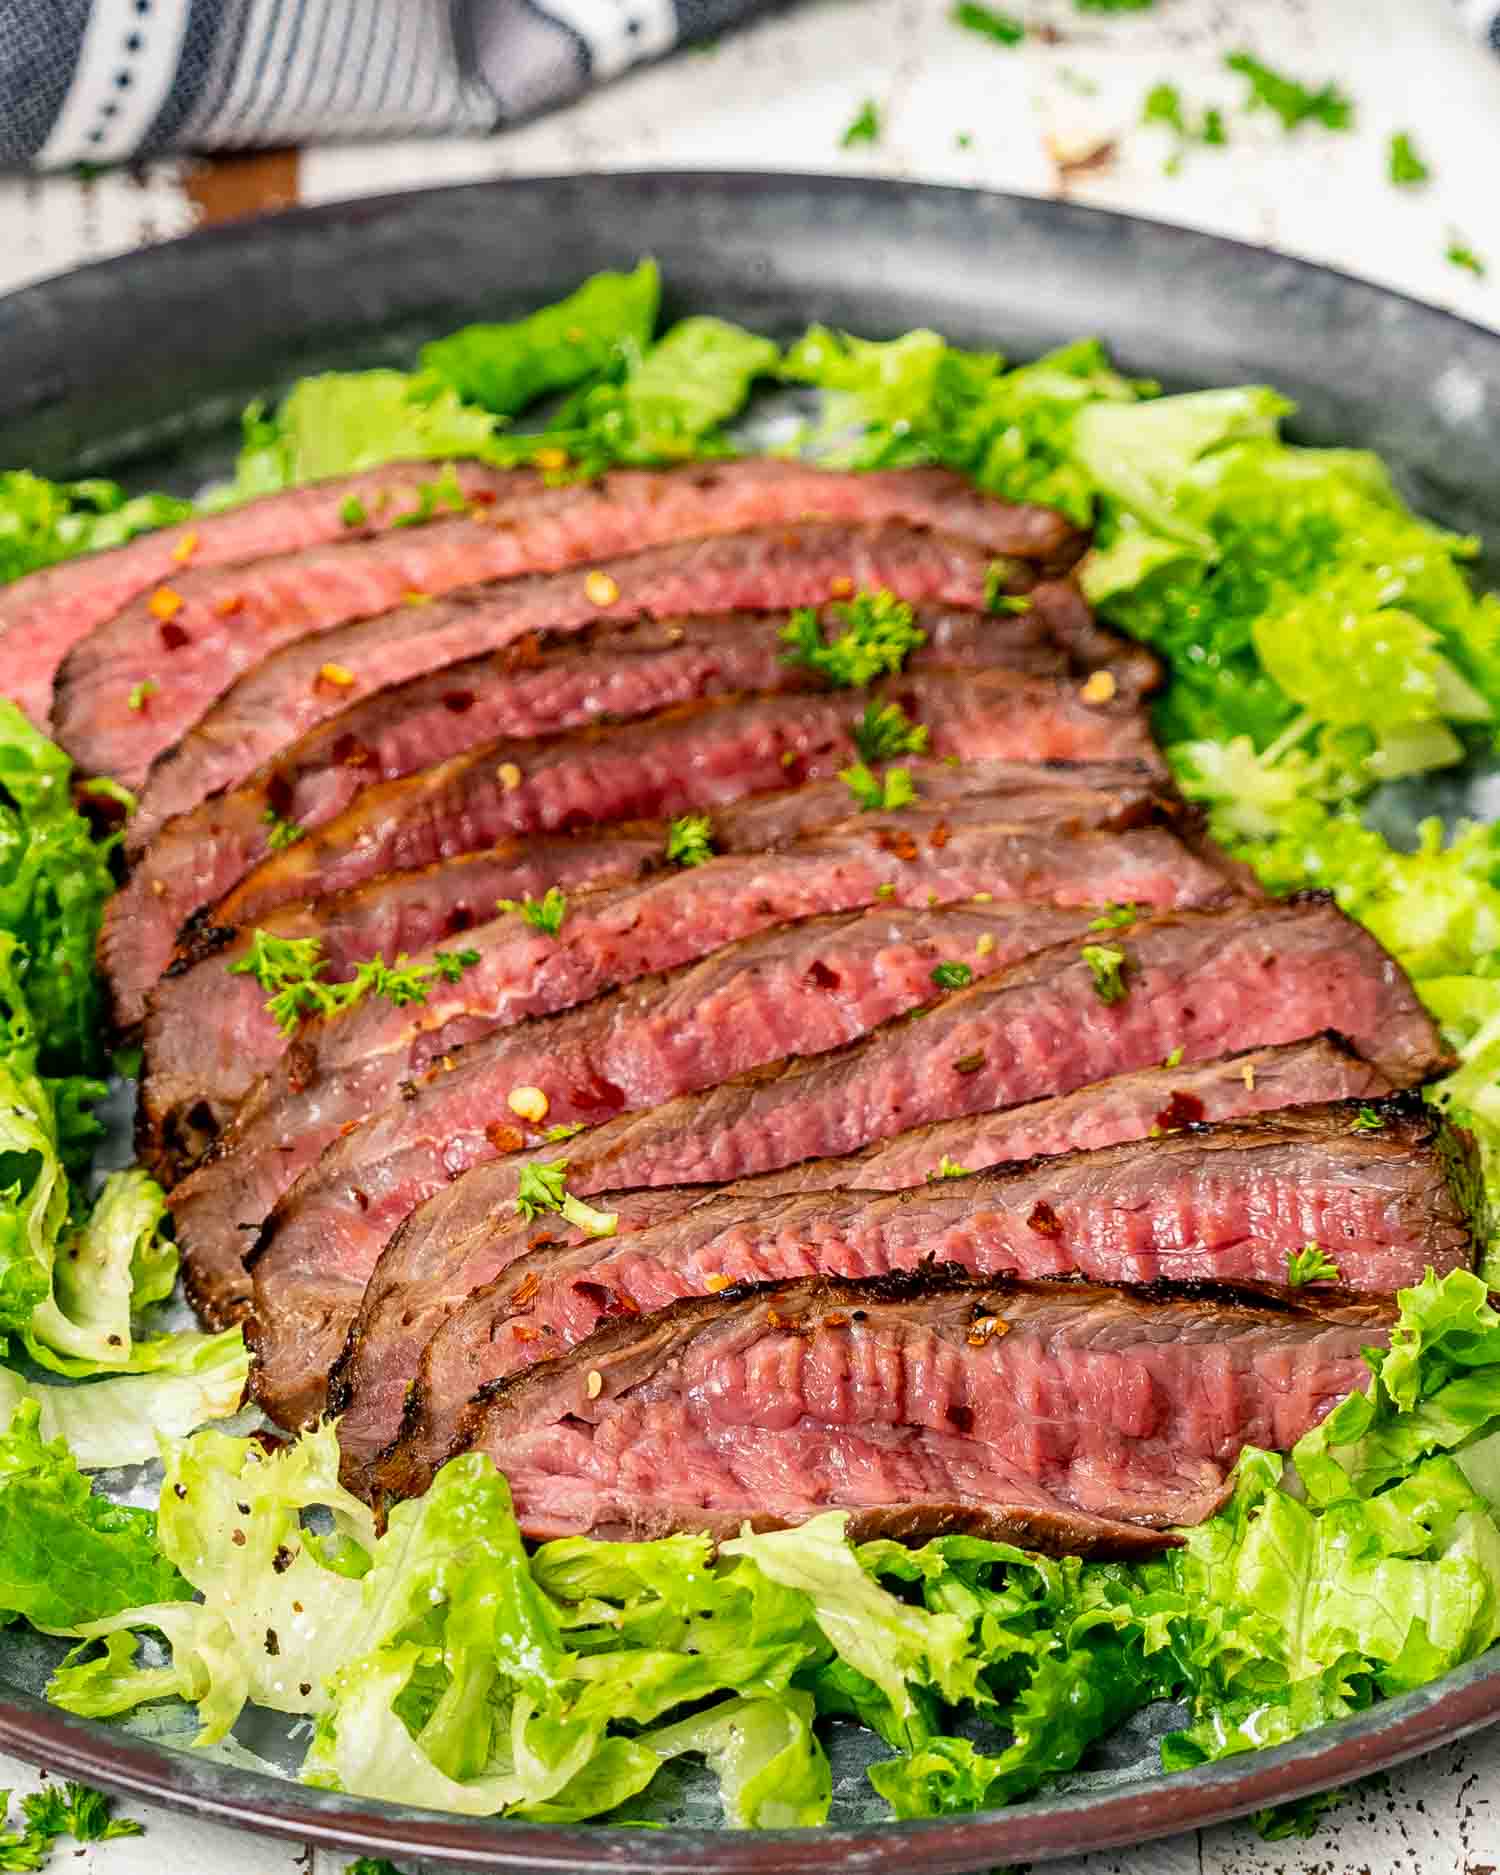 london broil all sliced up on a bed of lettuce.